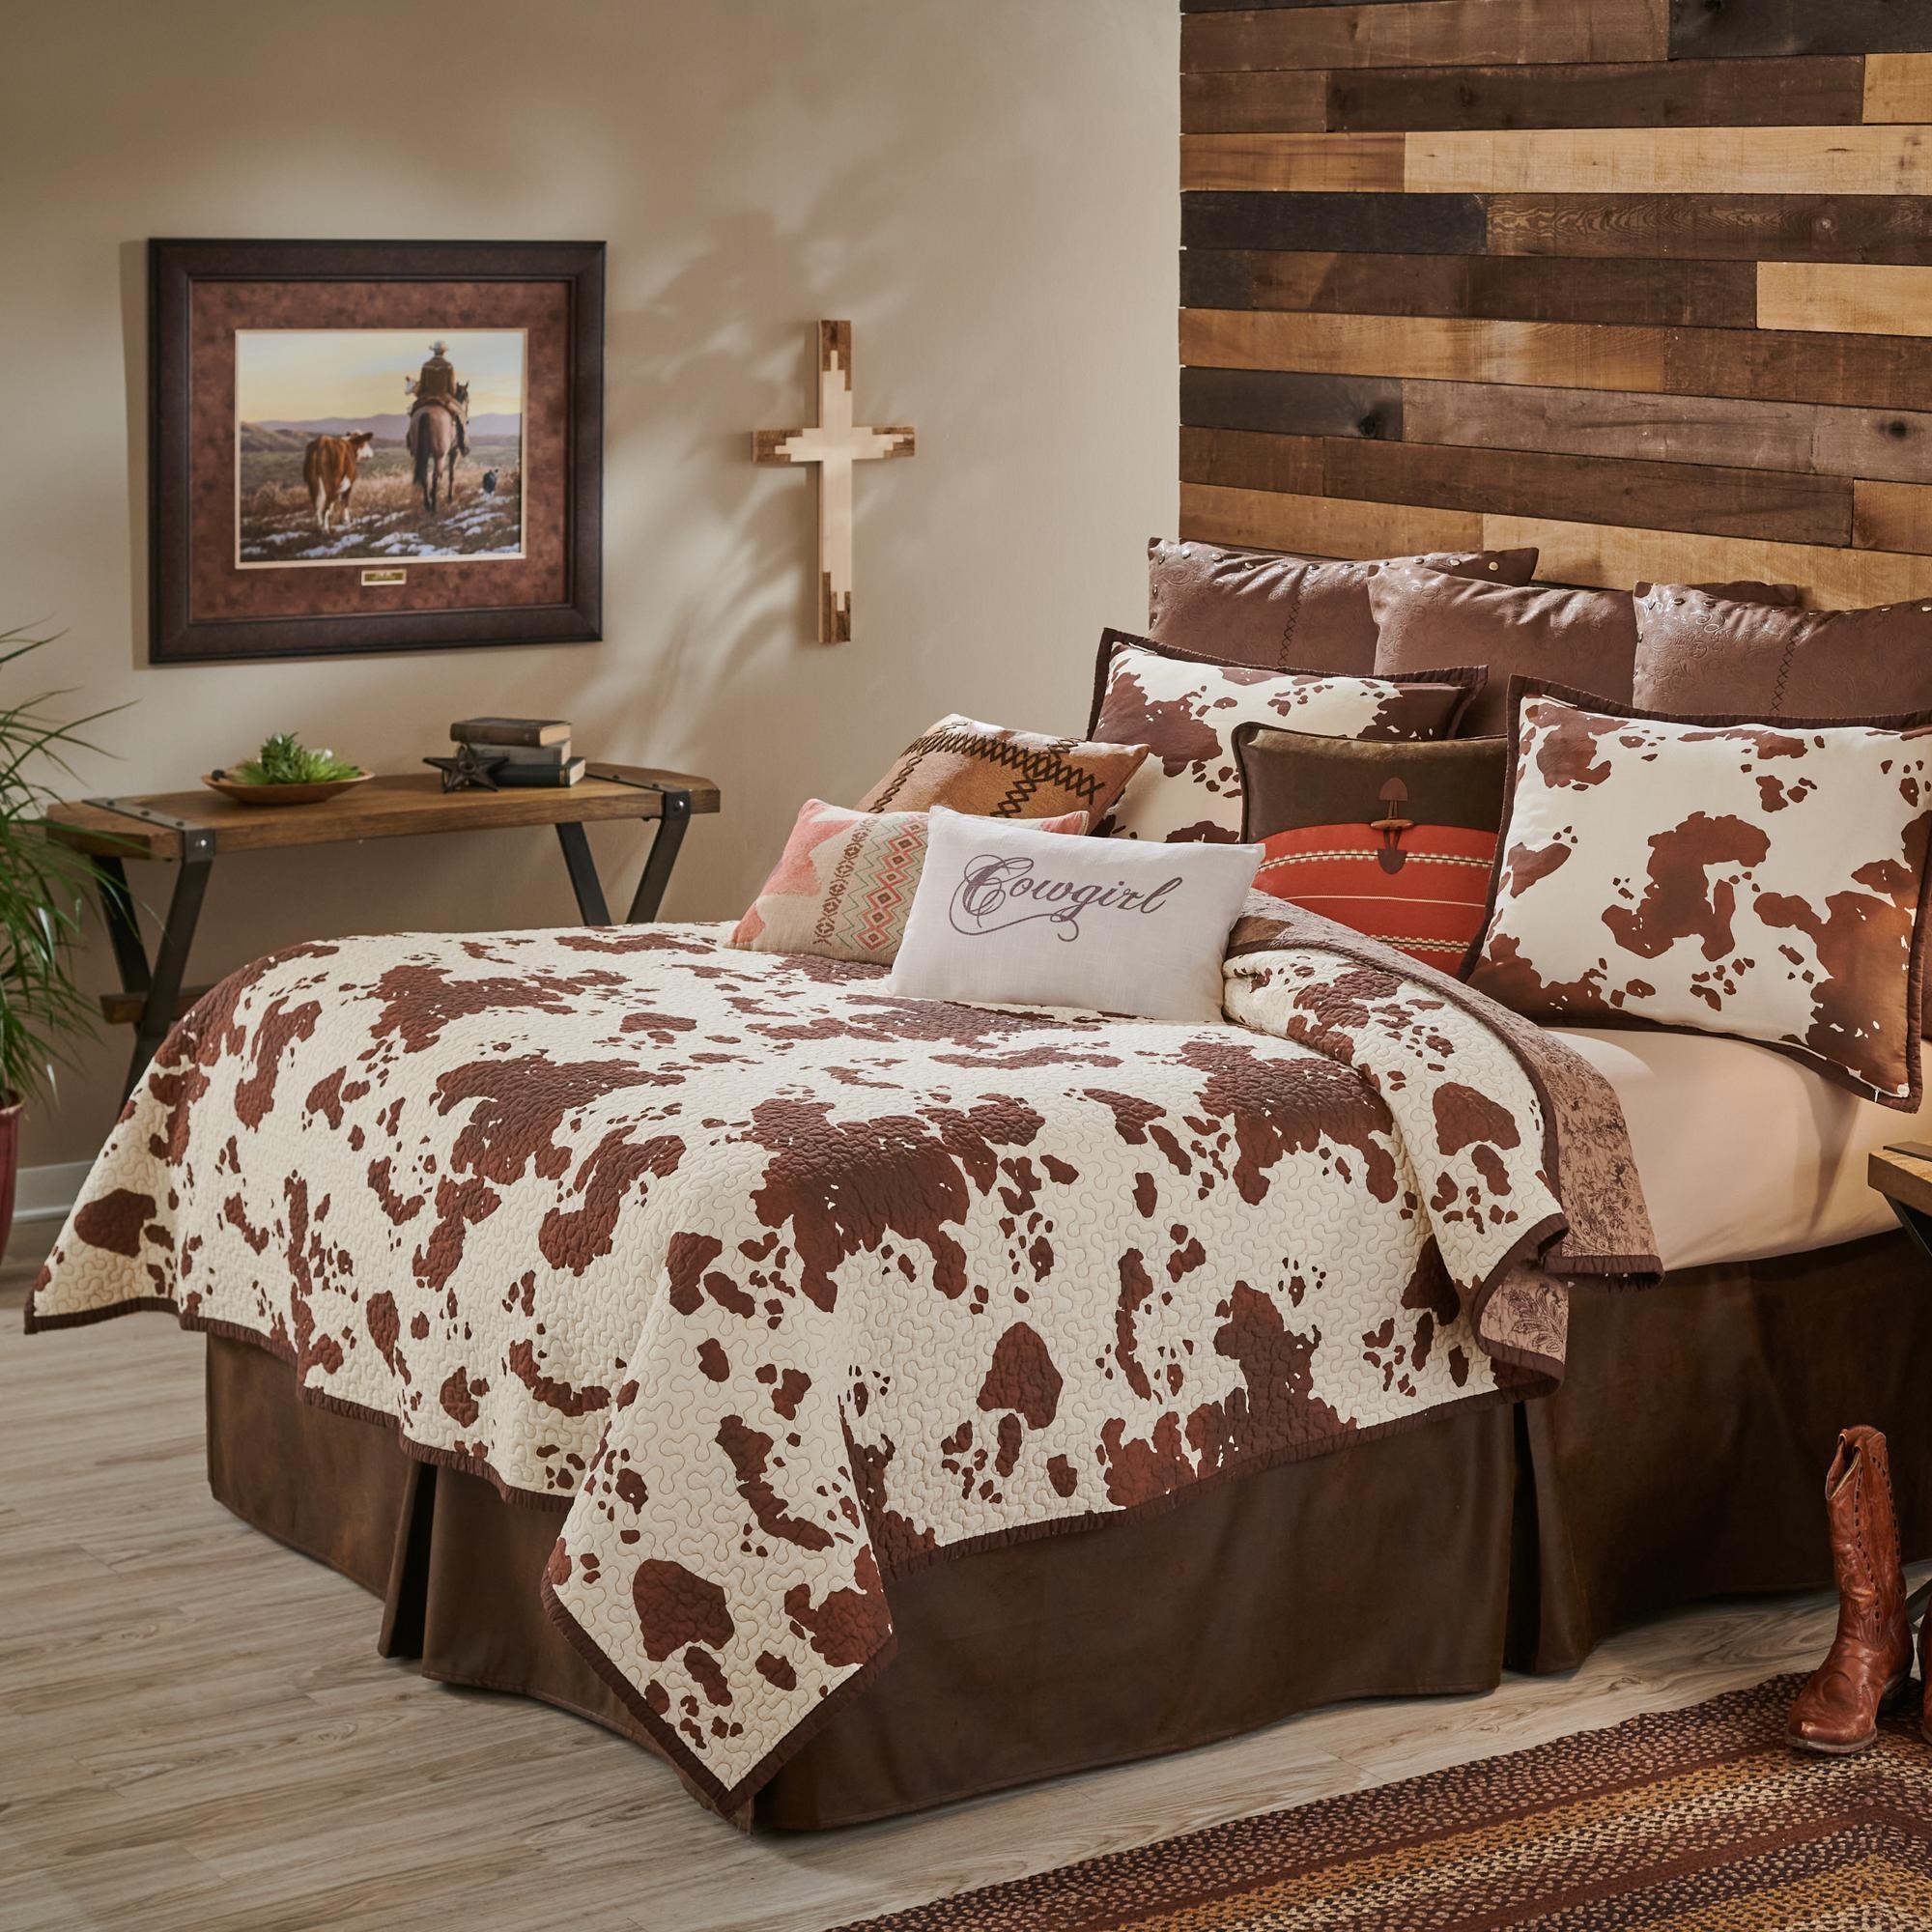 Ranch Retreat Bedding Collection - Wild Wings